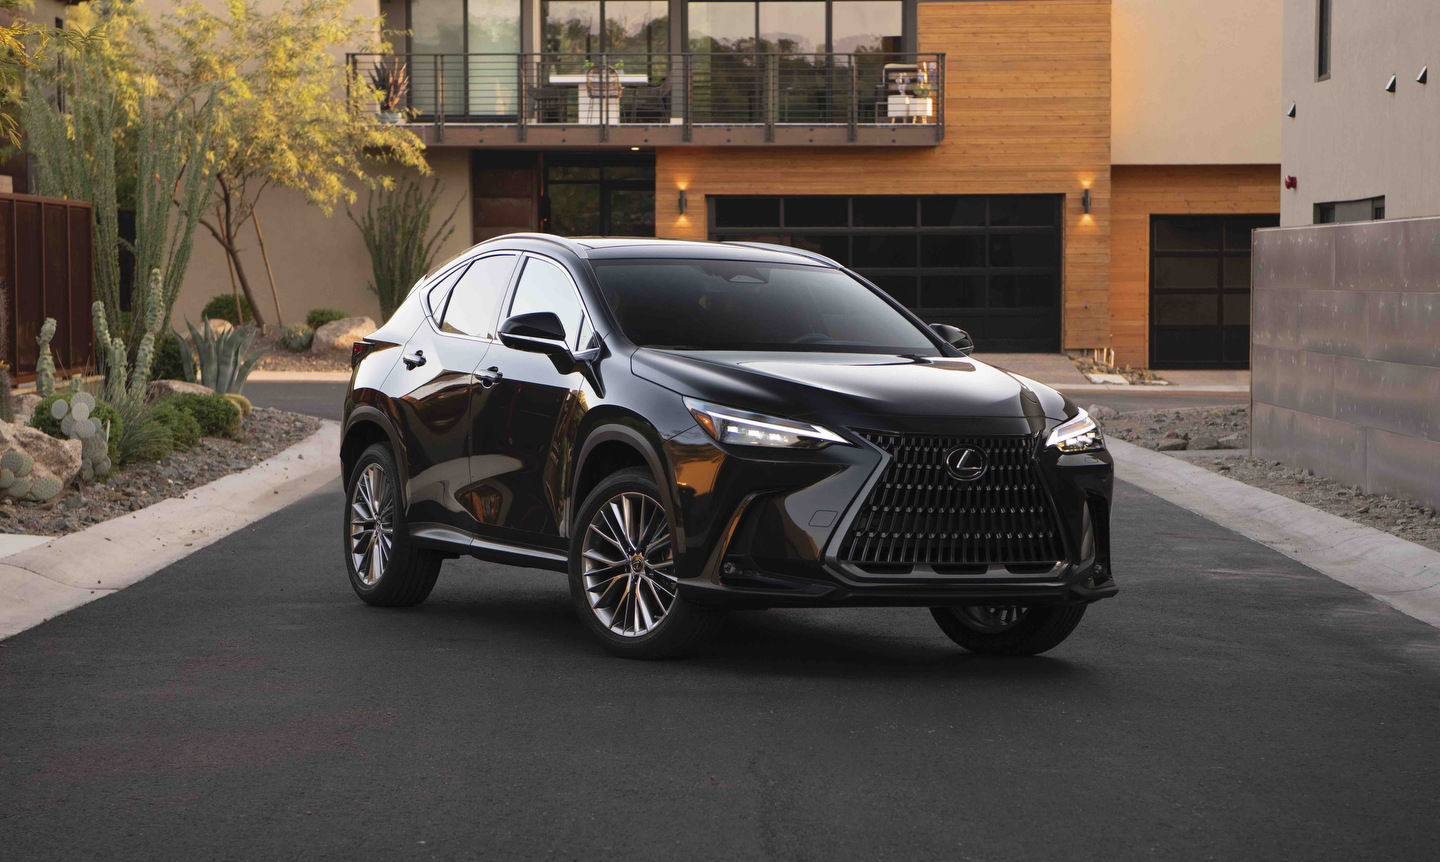 A Look at the Improvements Made to the 2022 Lexus NX